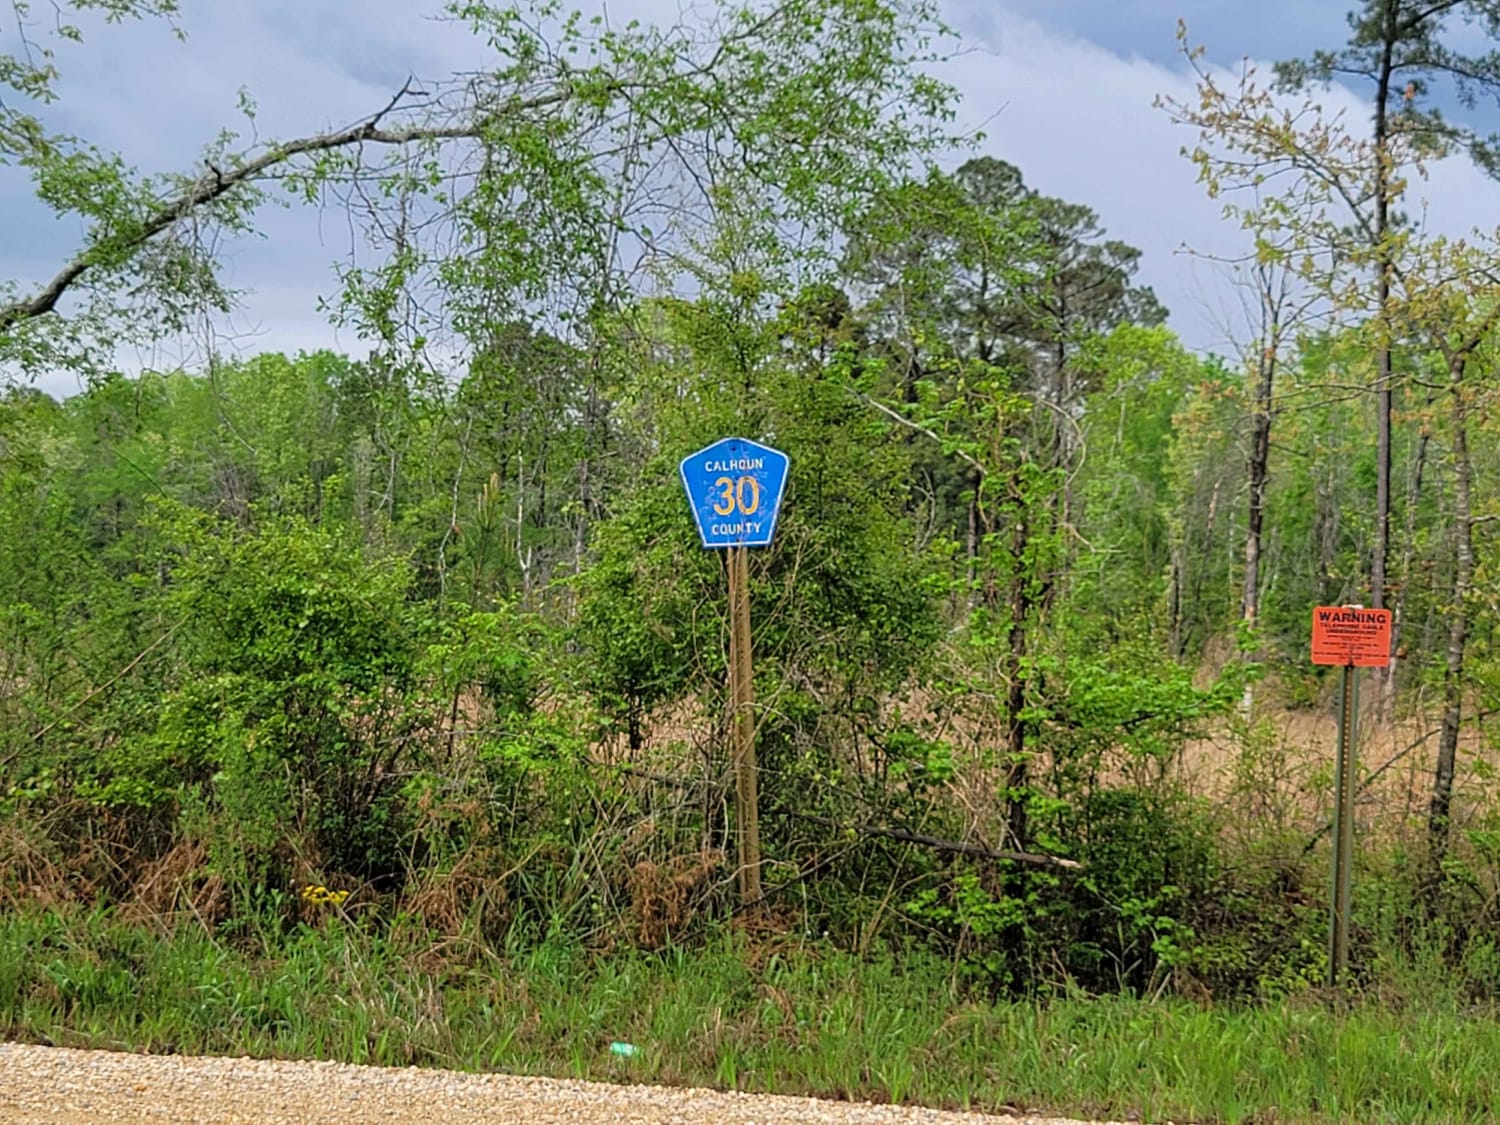 The Arkansas Overland Route – Section 11 – County Road 30 and 32